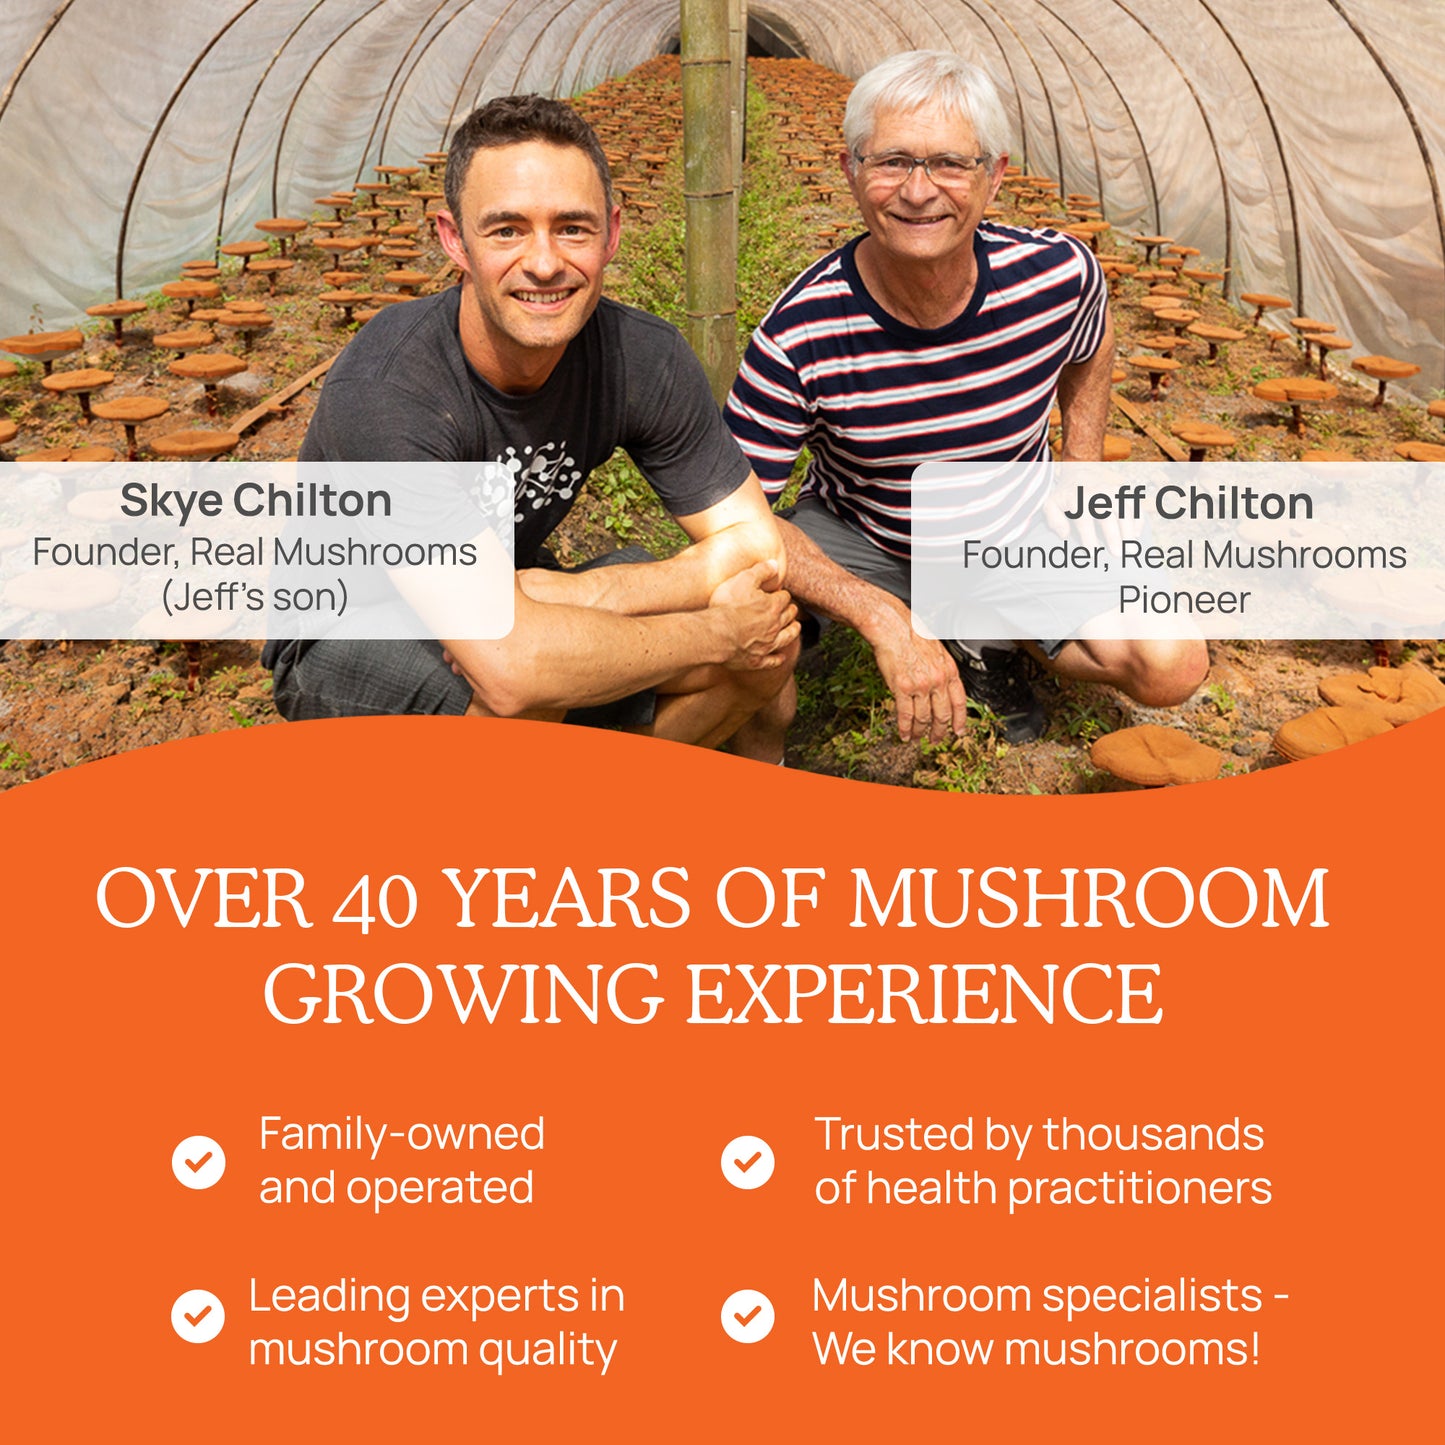 Two men, identified as Skye Chilton and Jeff Chilton, founders of Real Mushrooms, smiling inside a mushroom growing facility with text highlighting over 40 years of experience in RealBoost - Cordyceps, Guayusa and Ginseng.